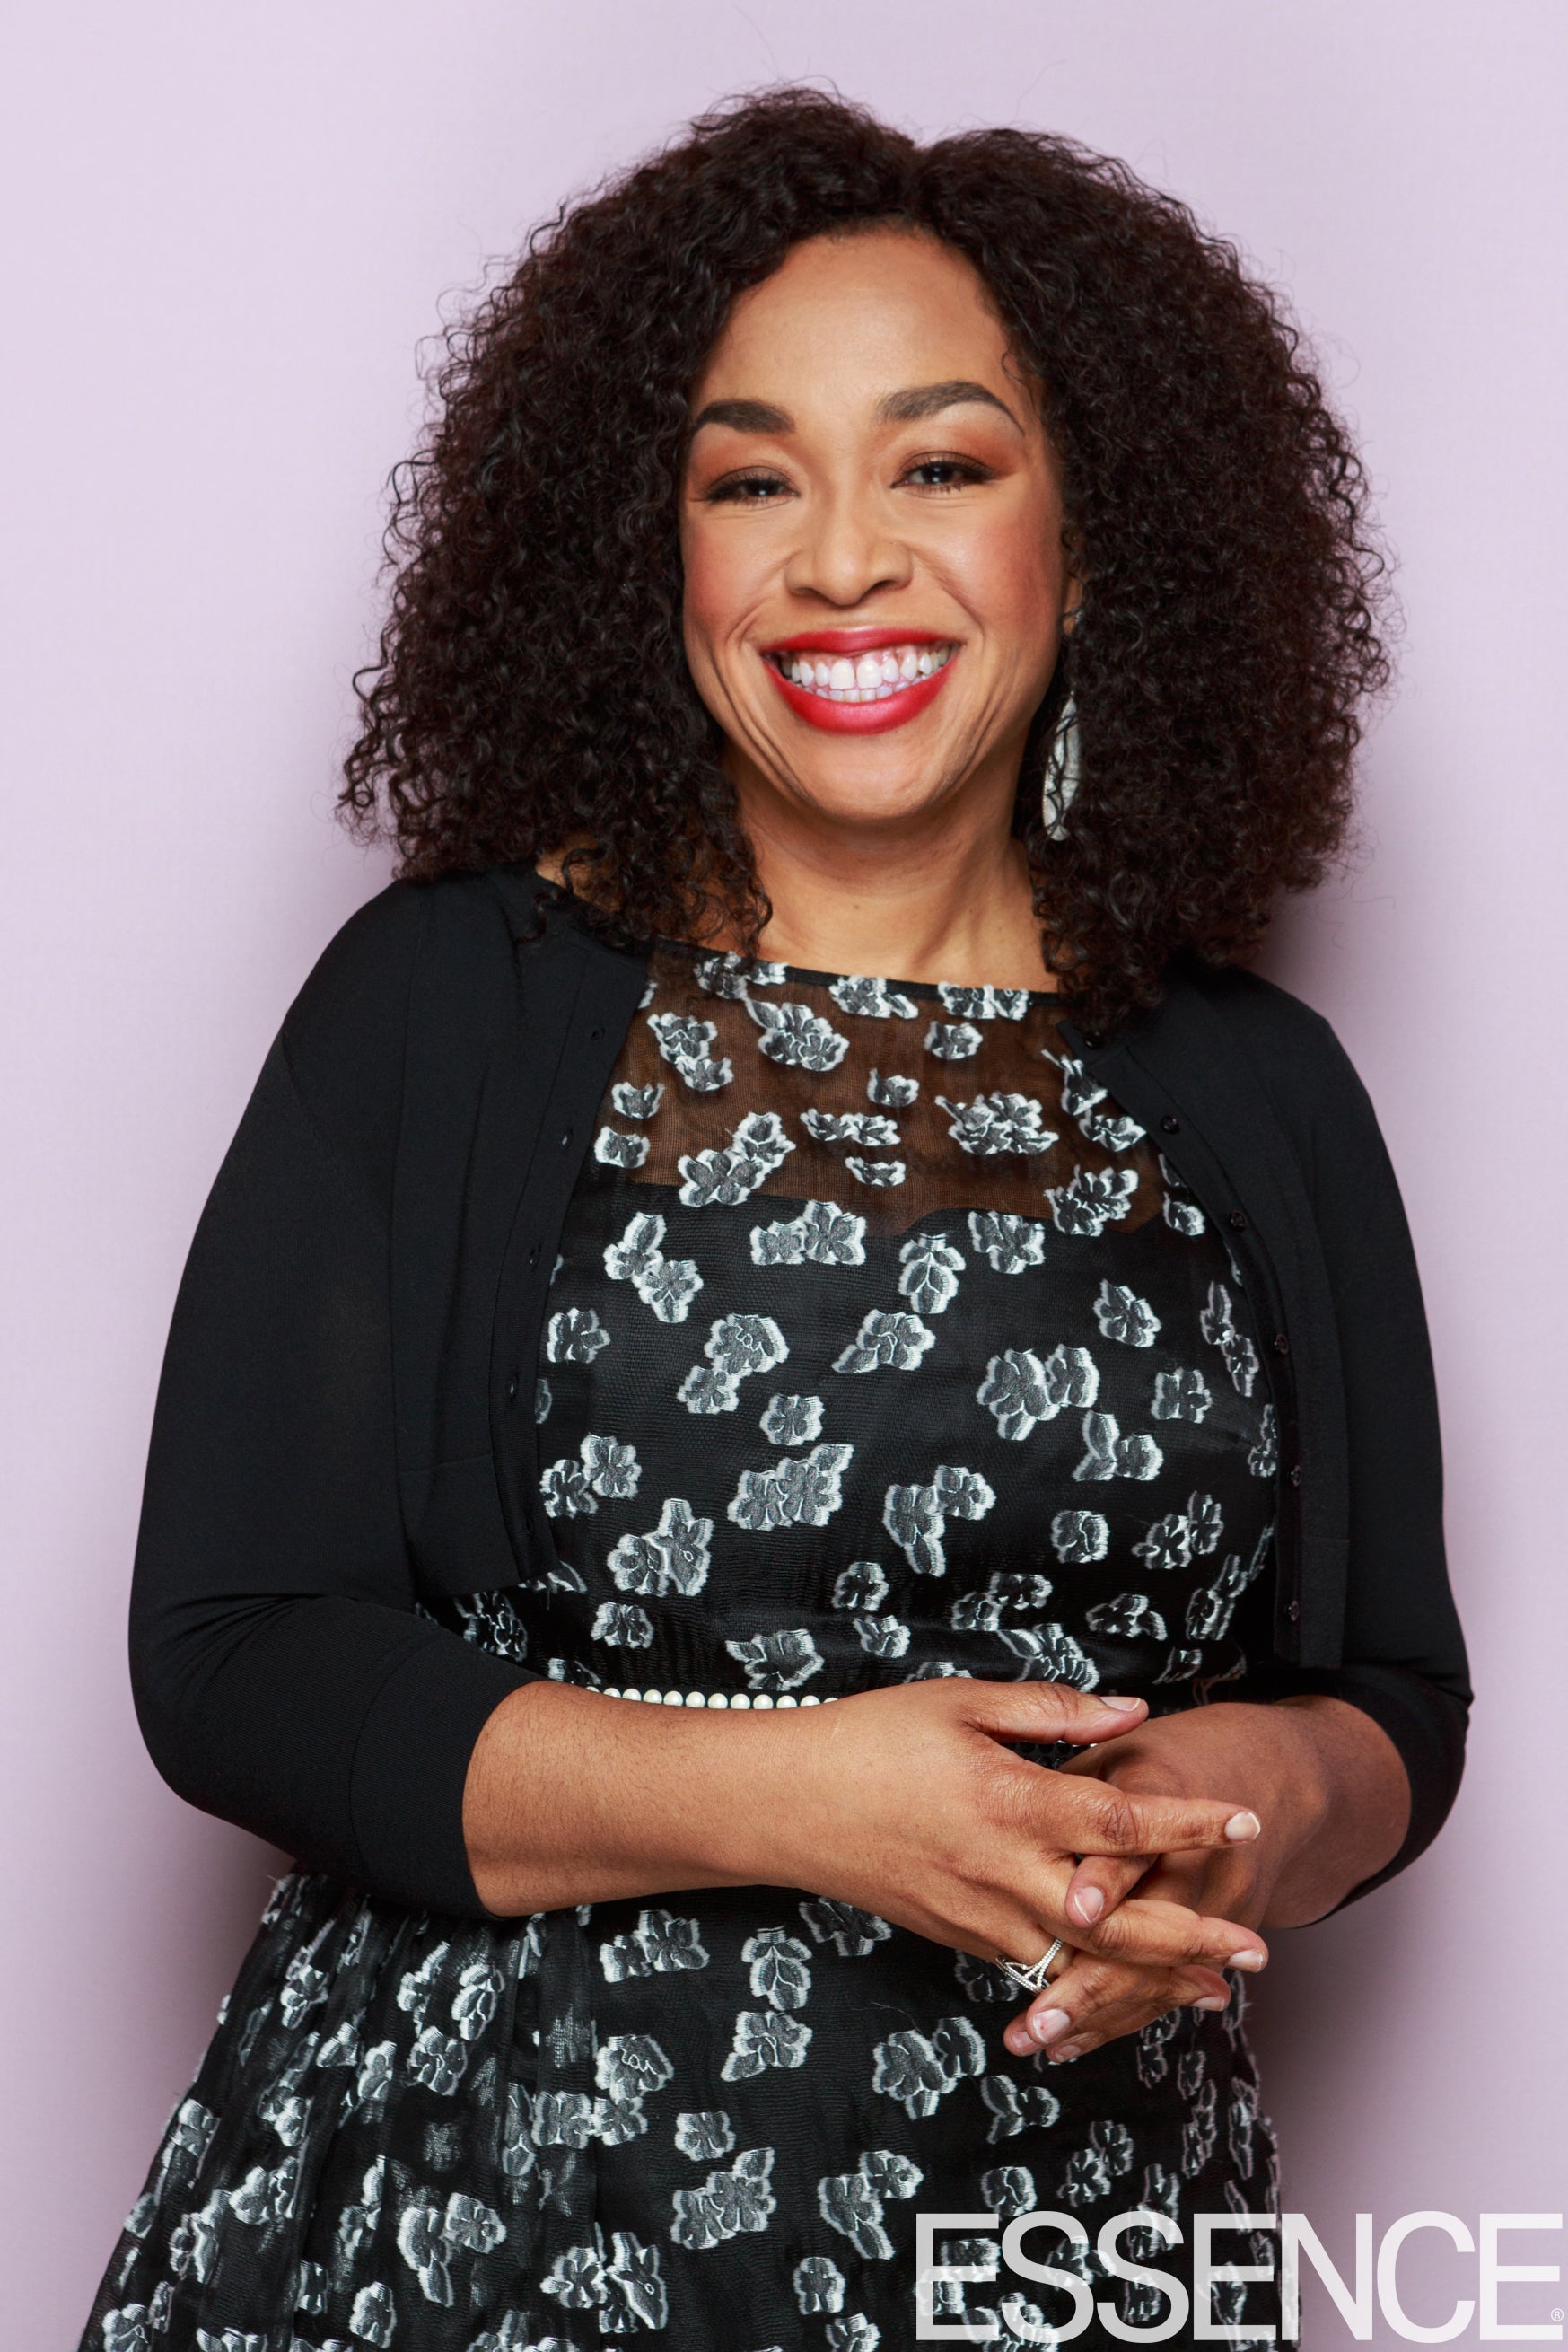 Shonda Rhimes Is The Highest Paid Showrunner In Hollywood, And She Wants Everyone To Know It